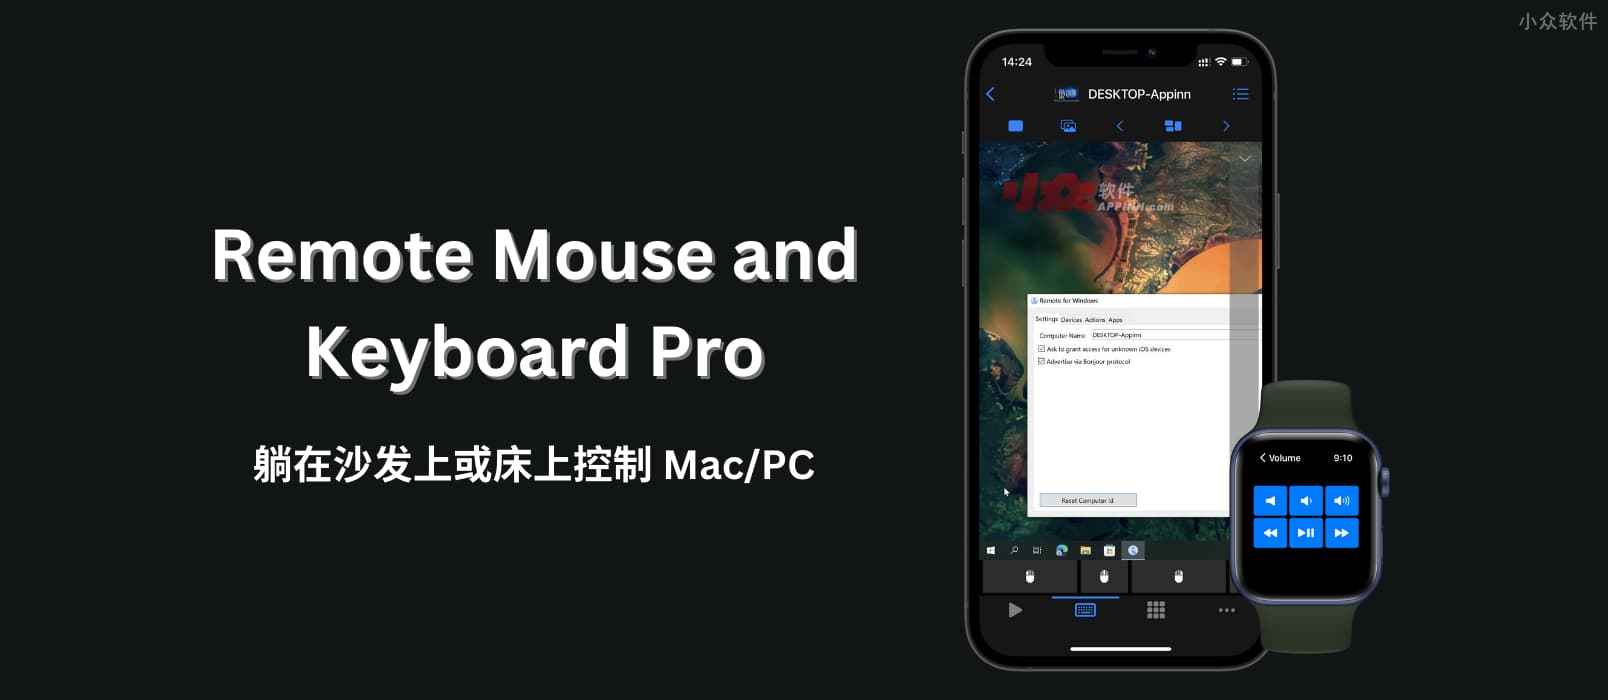 Remote Mouse and Keyboard Pro 限免：躺在沙发上或床上控制 Mac/PC[iPhone/iPad/Apple Watch]